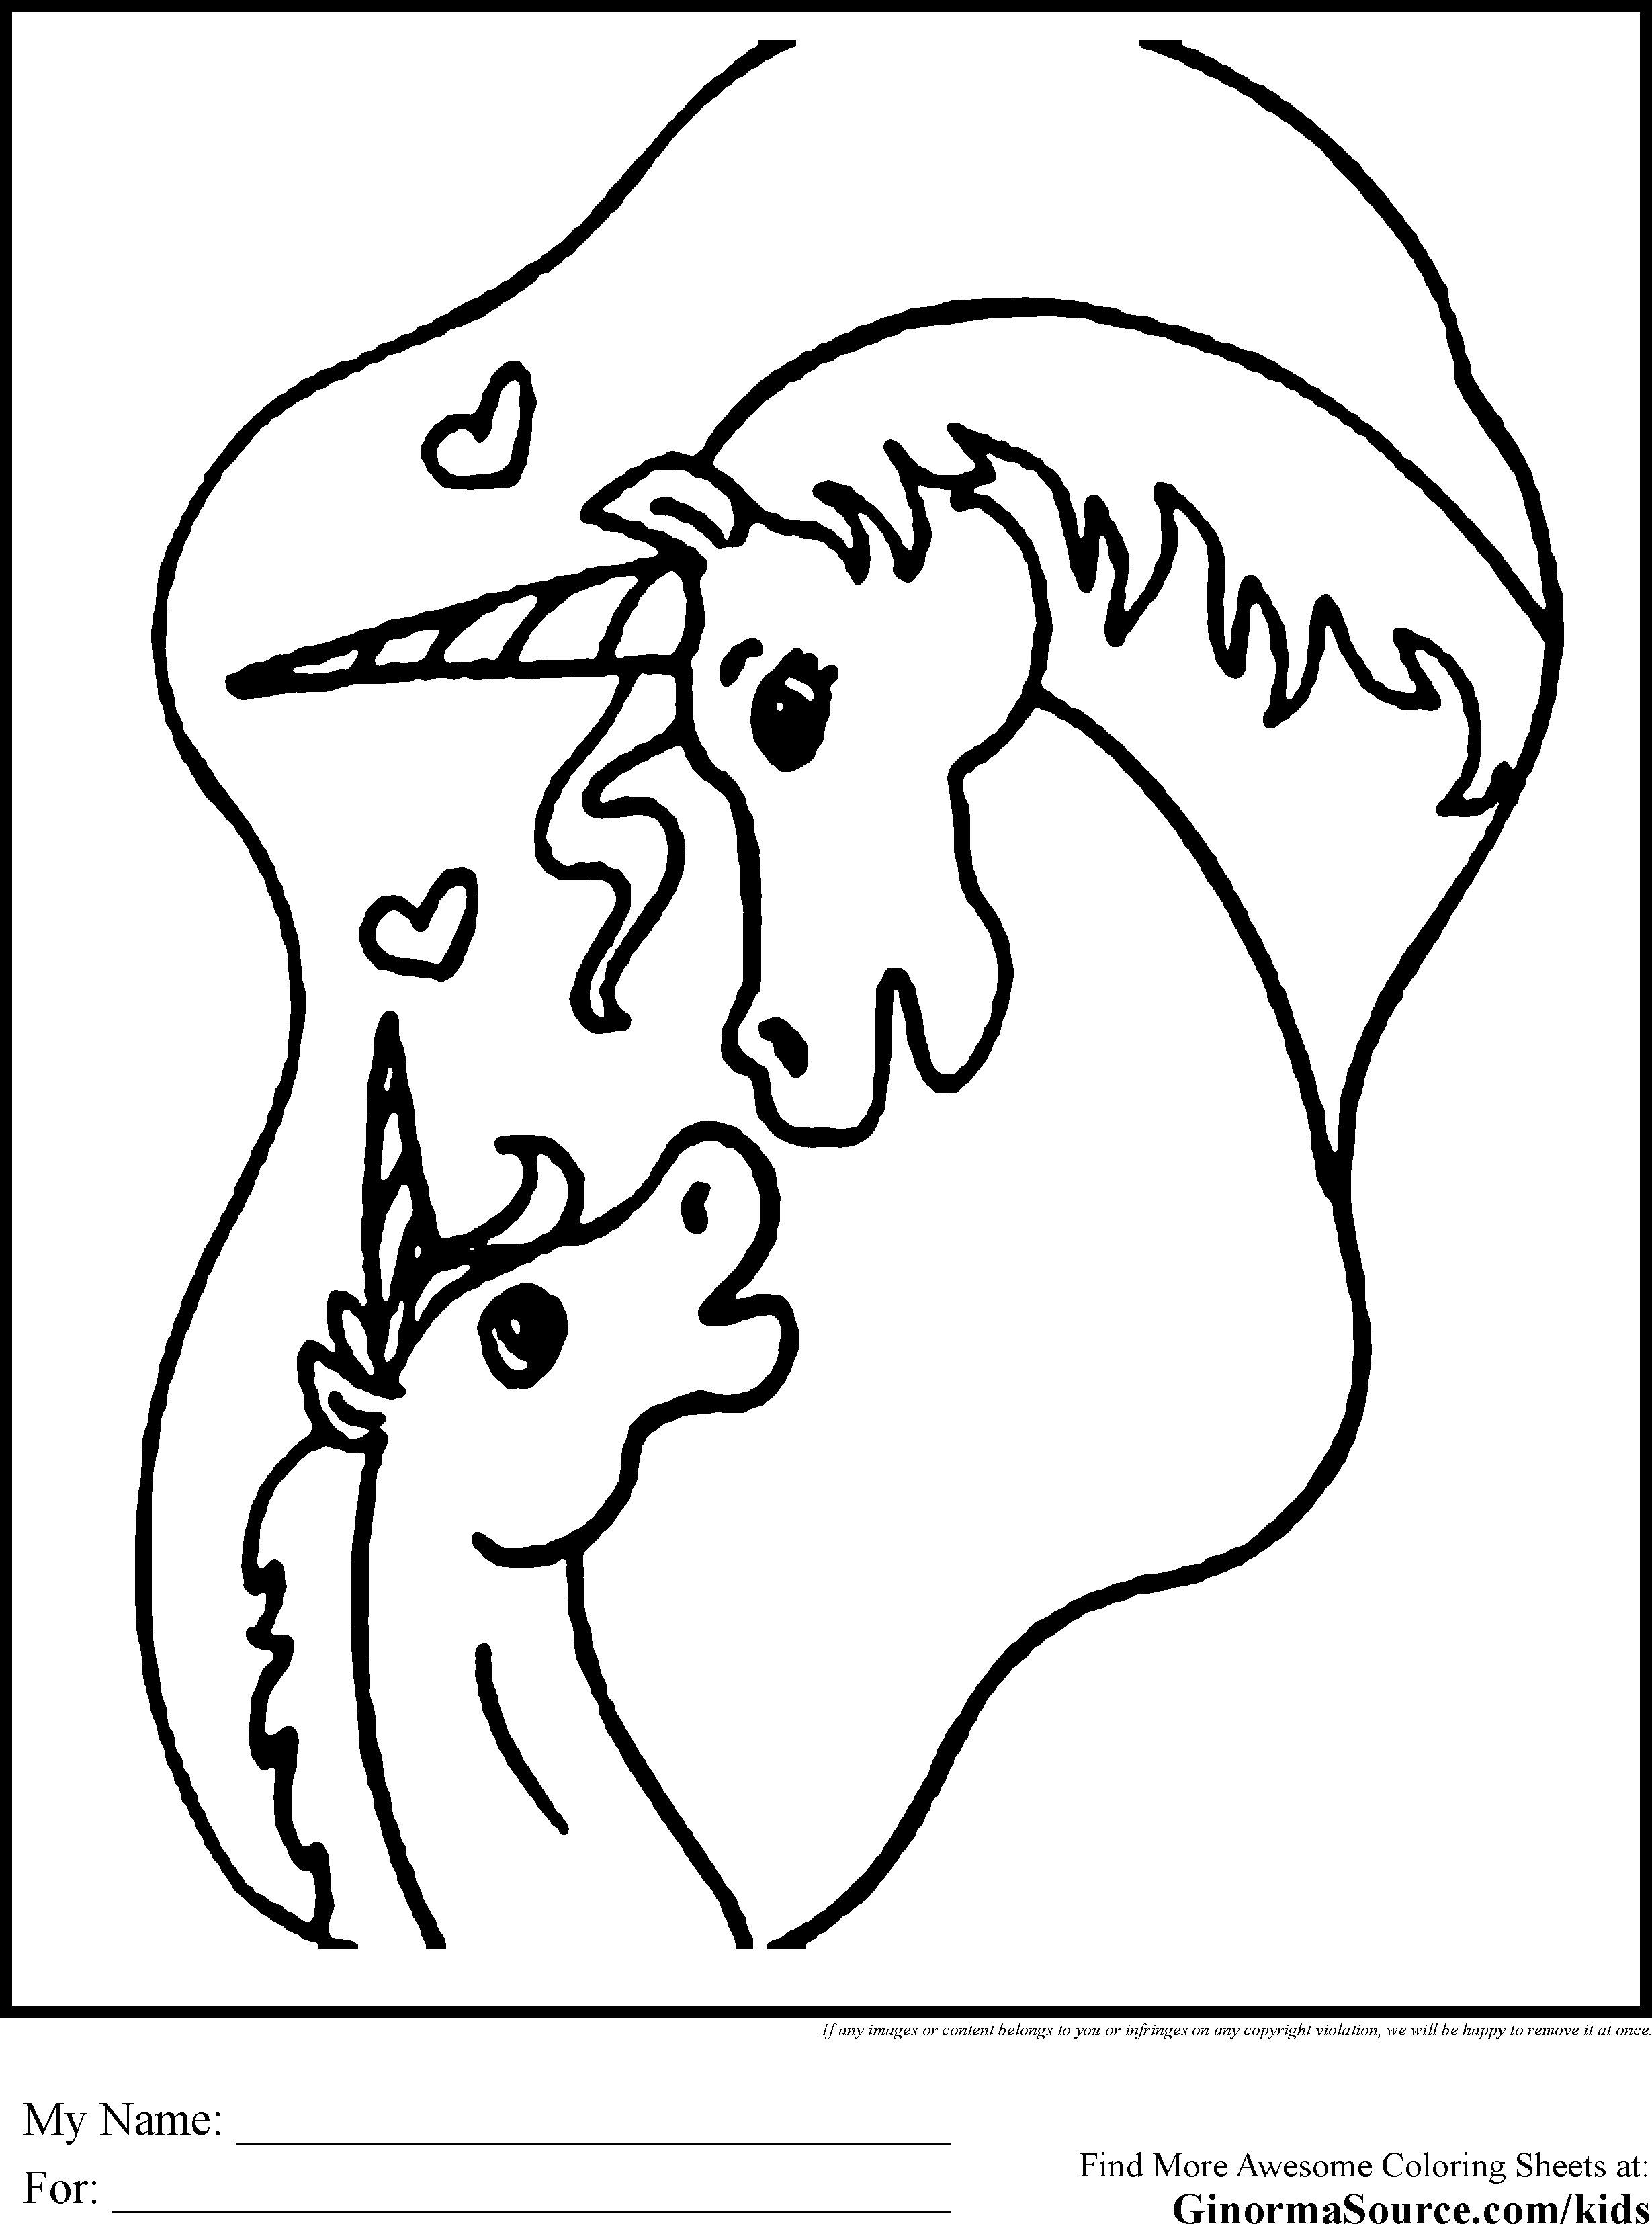 free coloring pages of unicorn and the baby unicorn - VoteForVerde.com